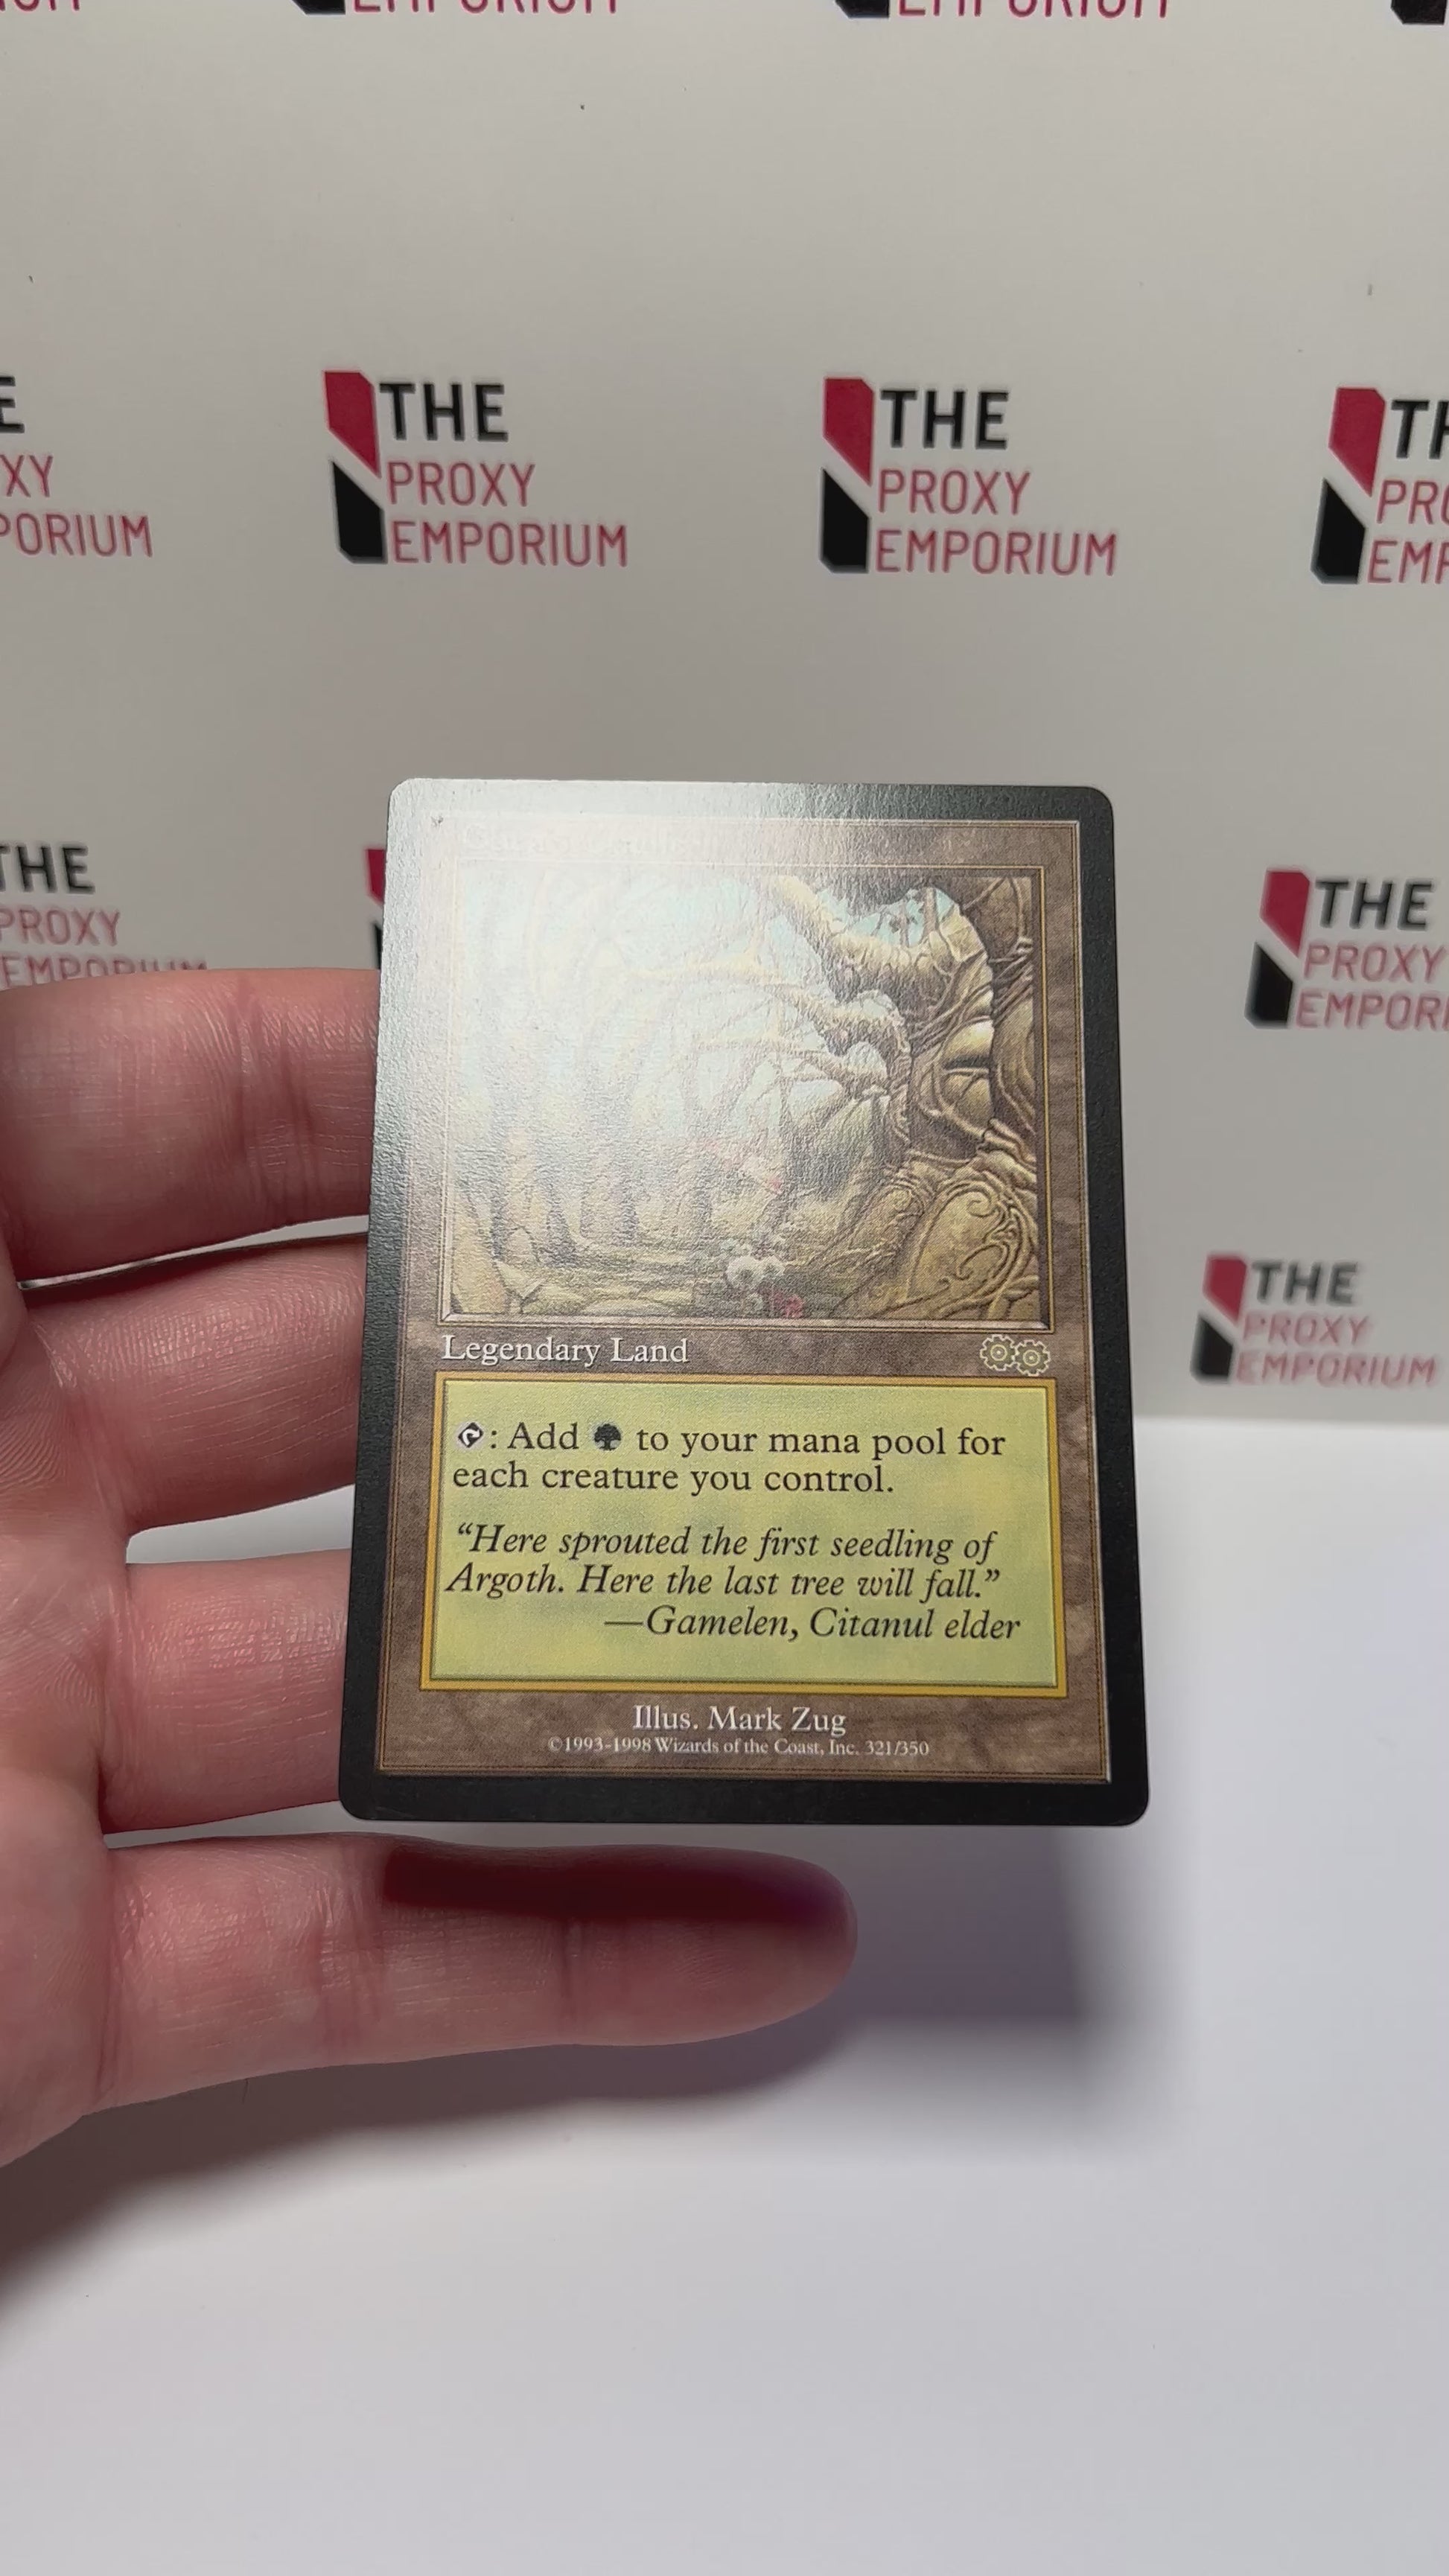 Gilded Drake  Magic The Gathering Proxy Cards